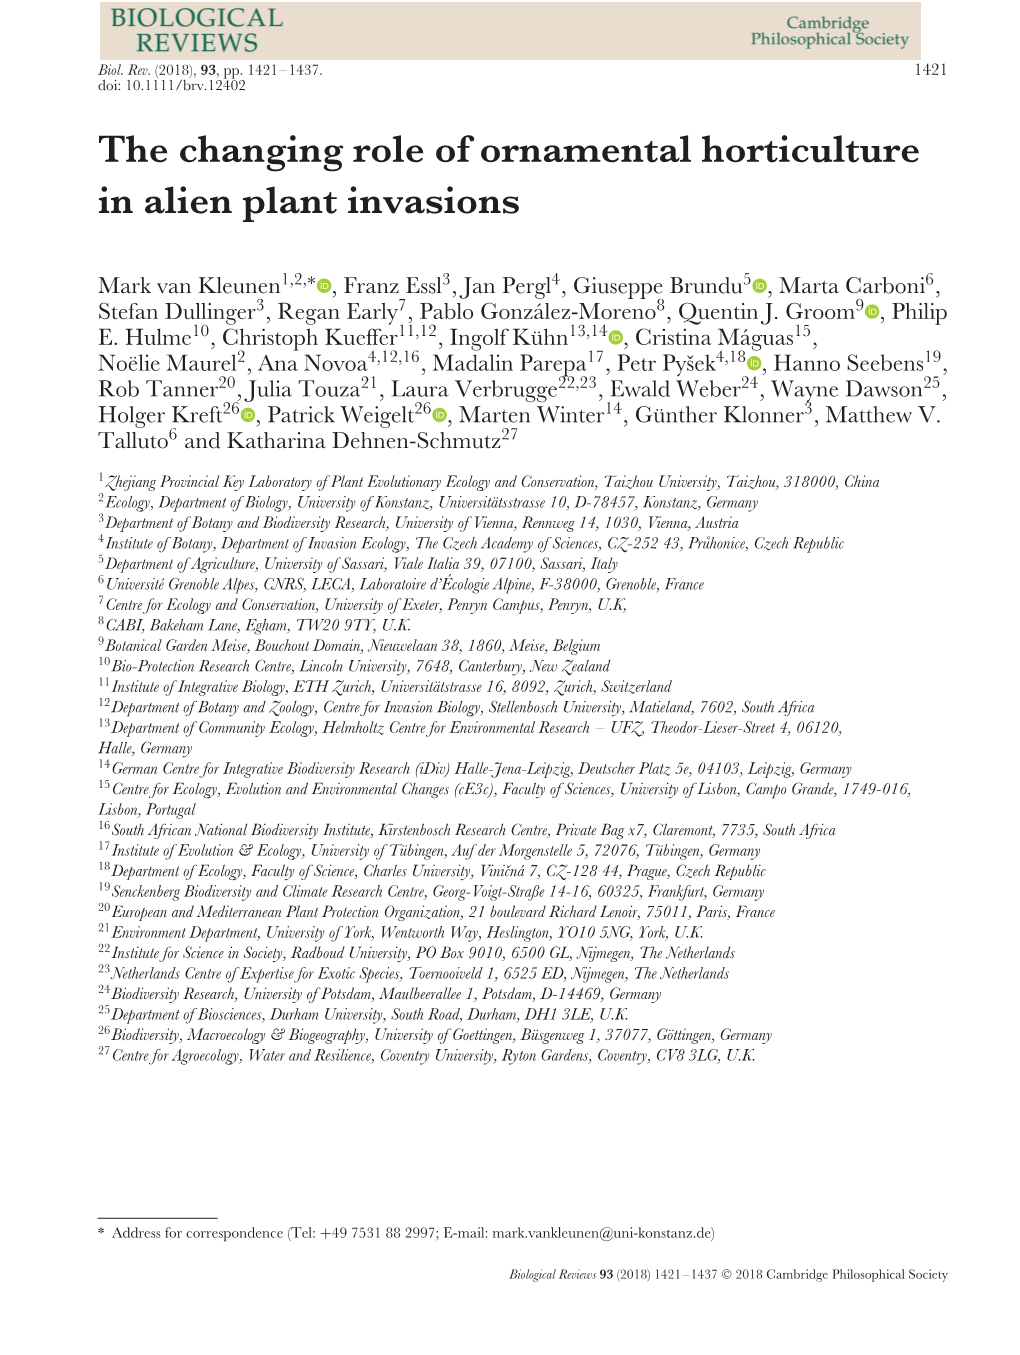 The Changing Role of Ornamental Horticulture in Alien Plant Invasions